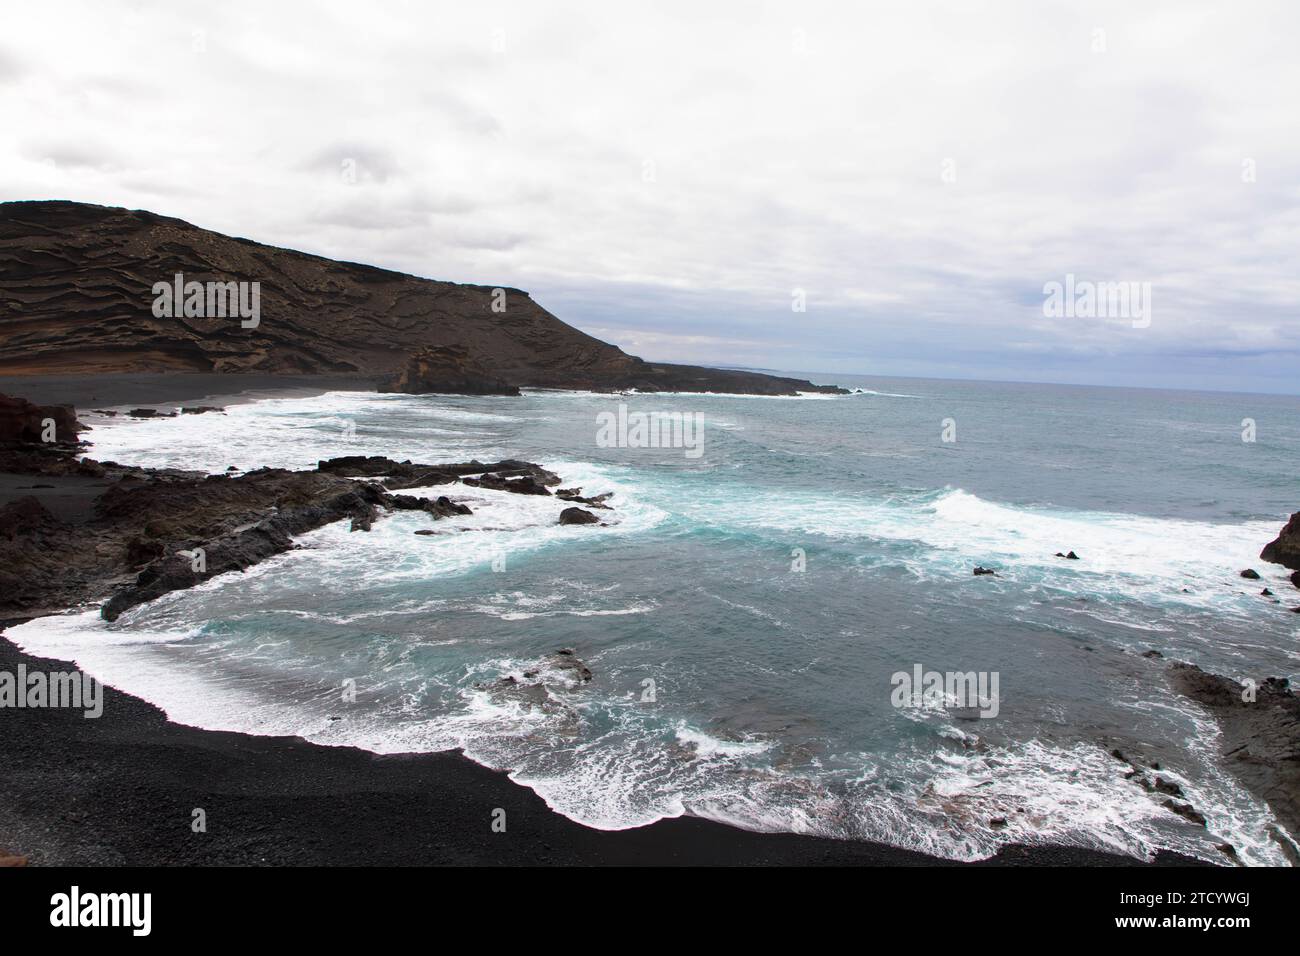 Panoramic view of Playa El Golfo volcanic beach and rocky coast on a windy day. Seen from the Charco de los Clicos viewpoint. Lanzarote, Canary Island. Stock Photo